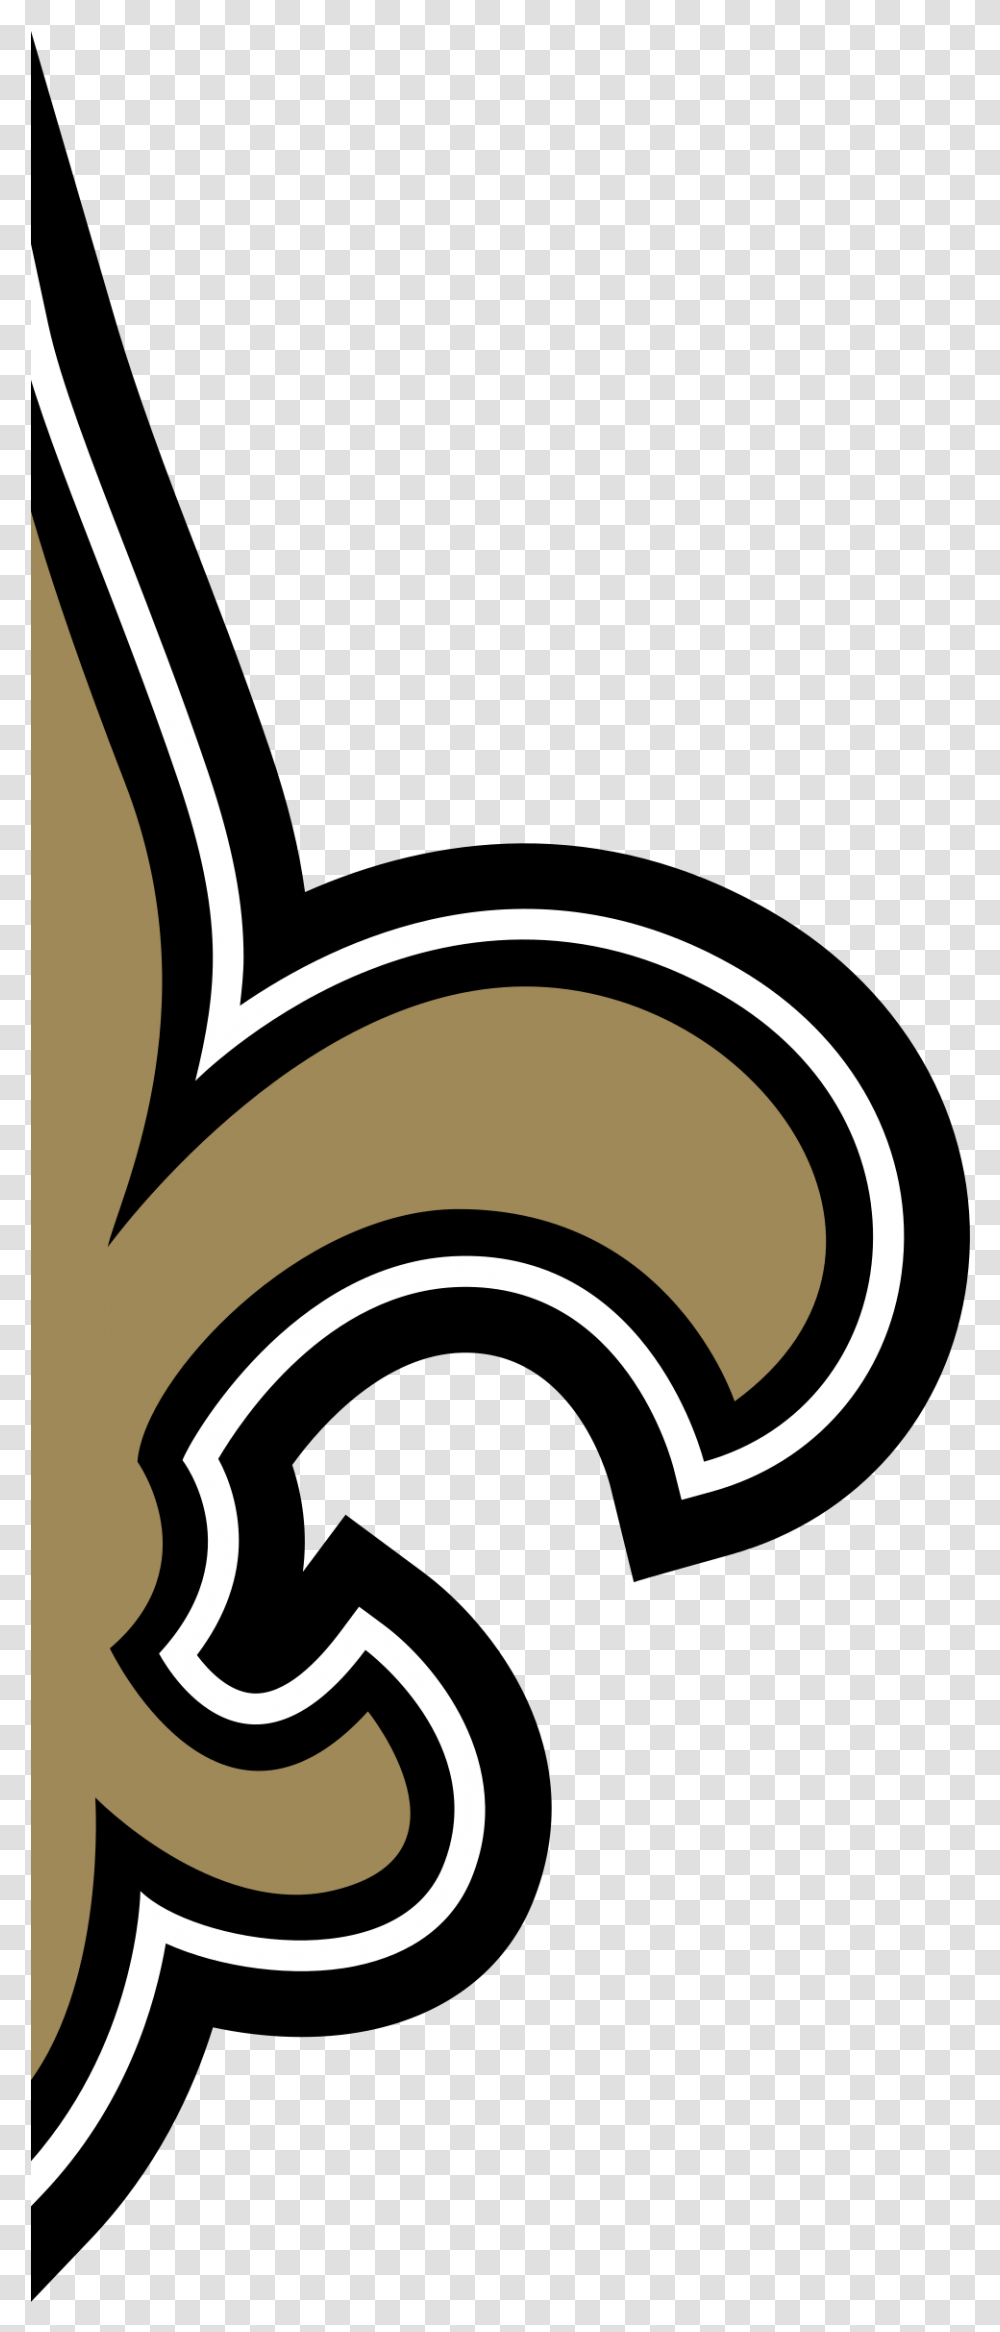 Of People Can't Name These Nfl Team Logos From Just A New Orleans Saints Fleur De Lis, Text, Number, Symbol, Hammer Transparent Png